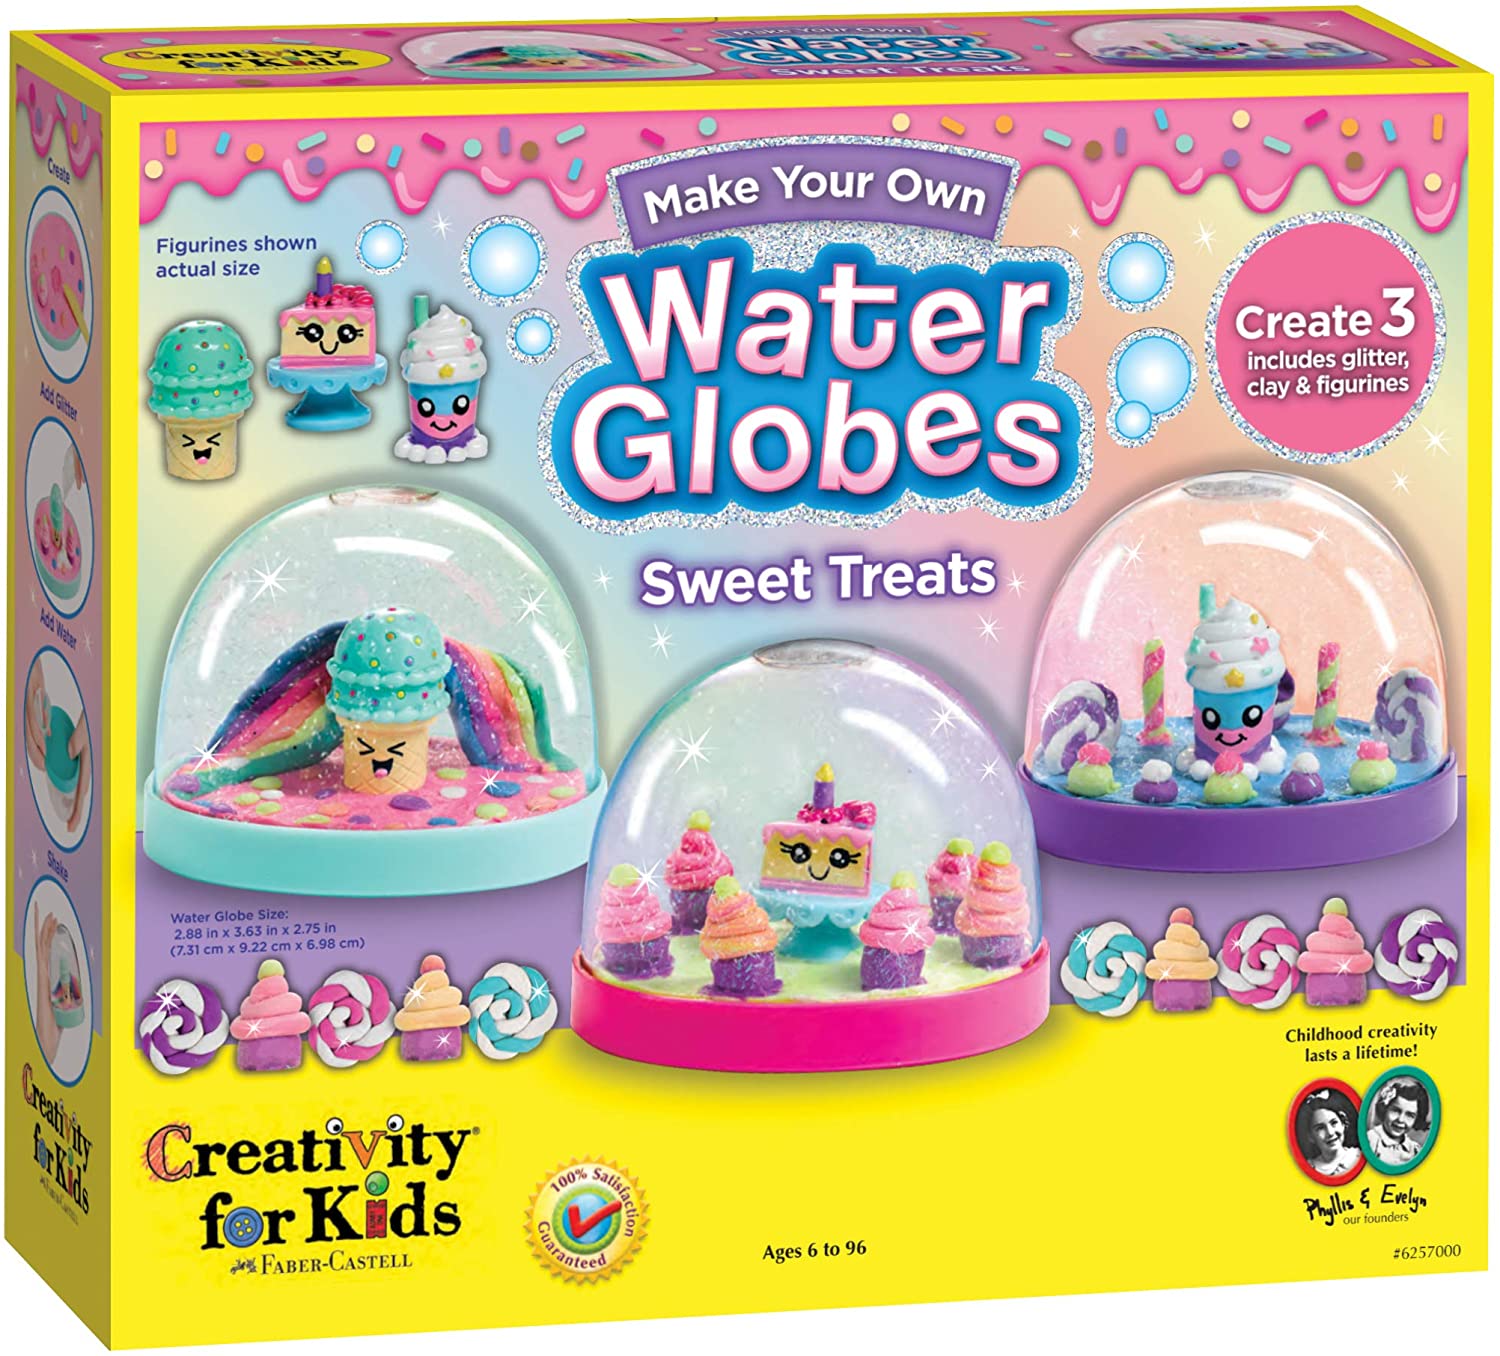 Make Your Own Water Globes: Sweet Treats - Ages 6+